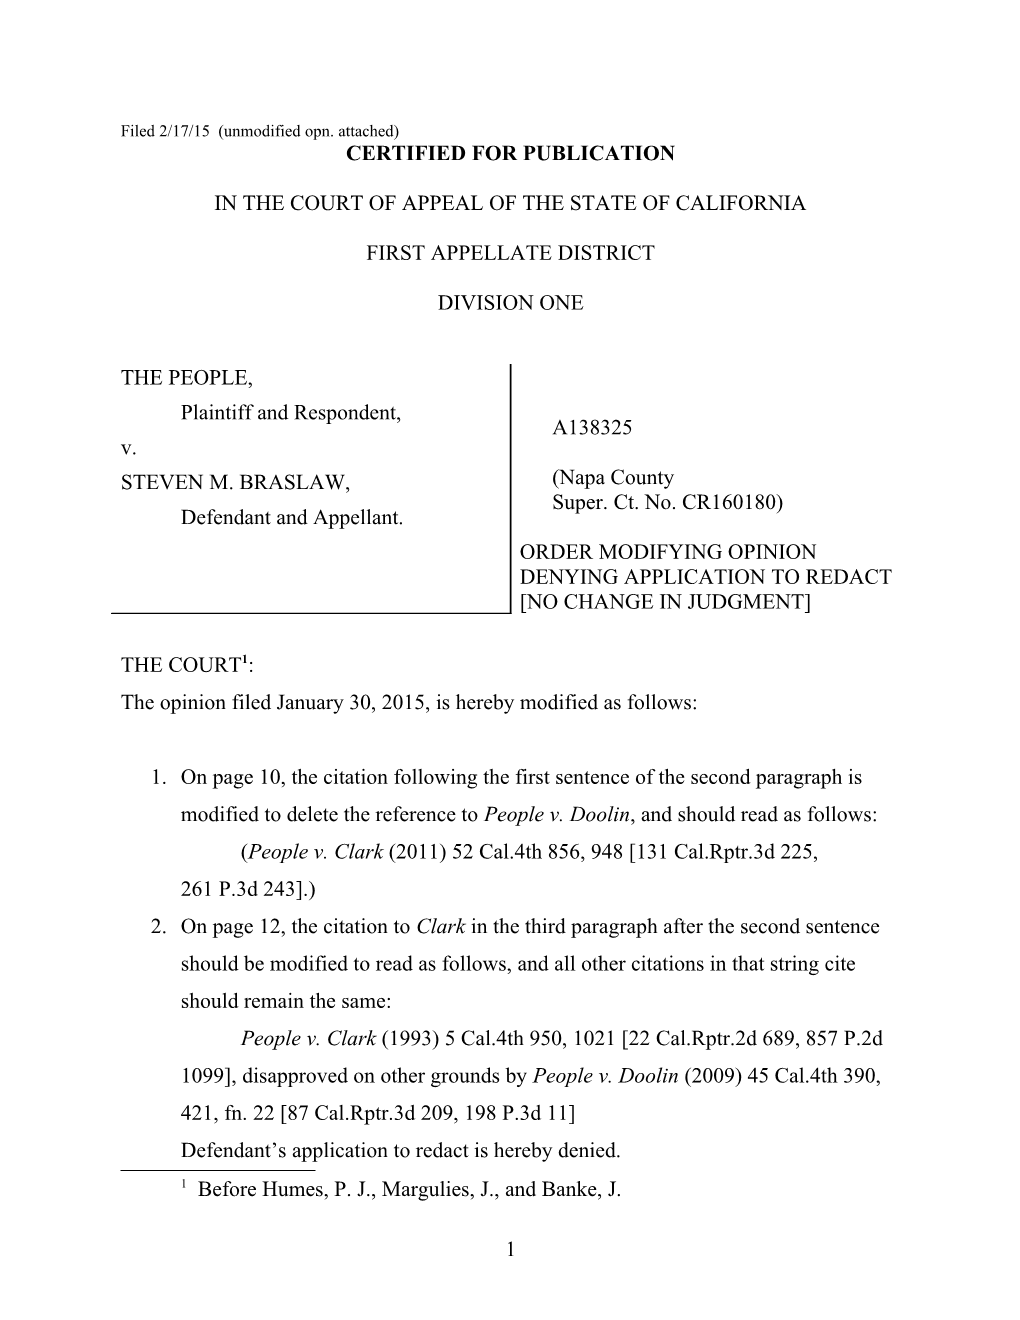 Filed 2/17/15 (Unmodified Opn. Attached)